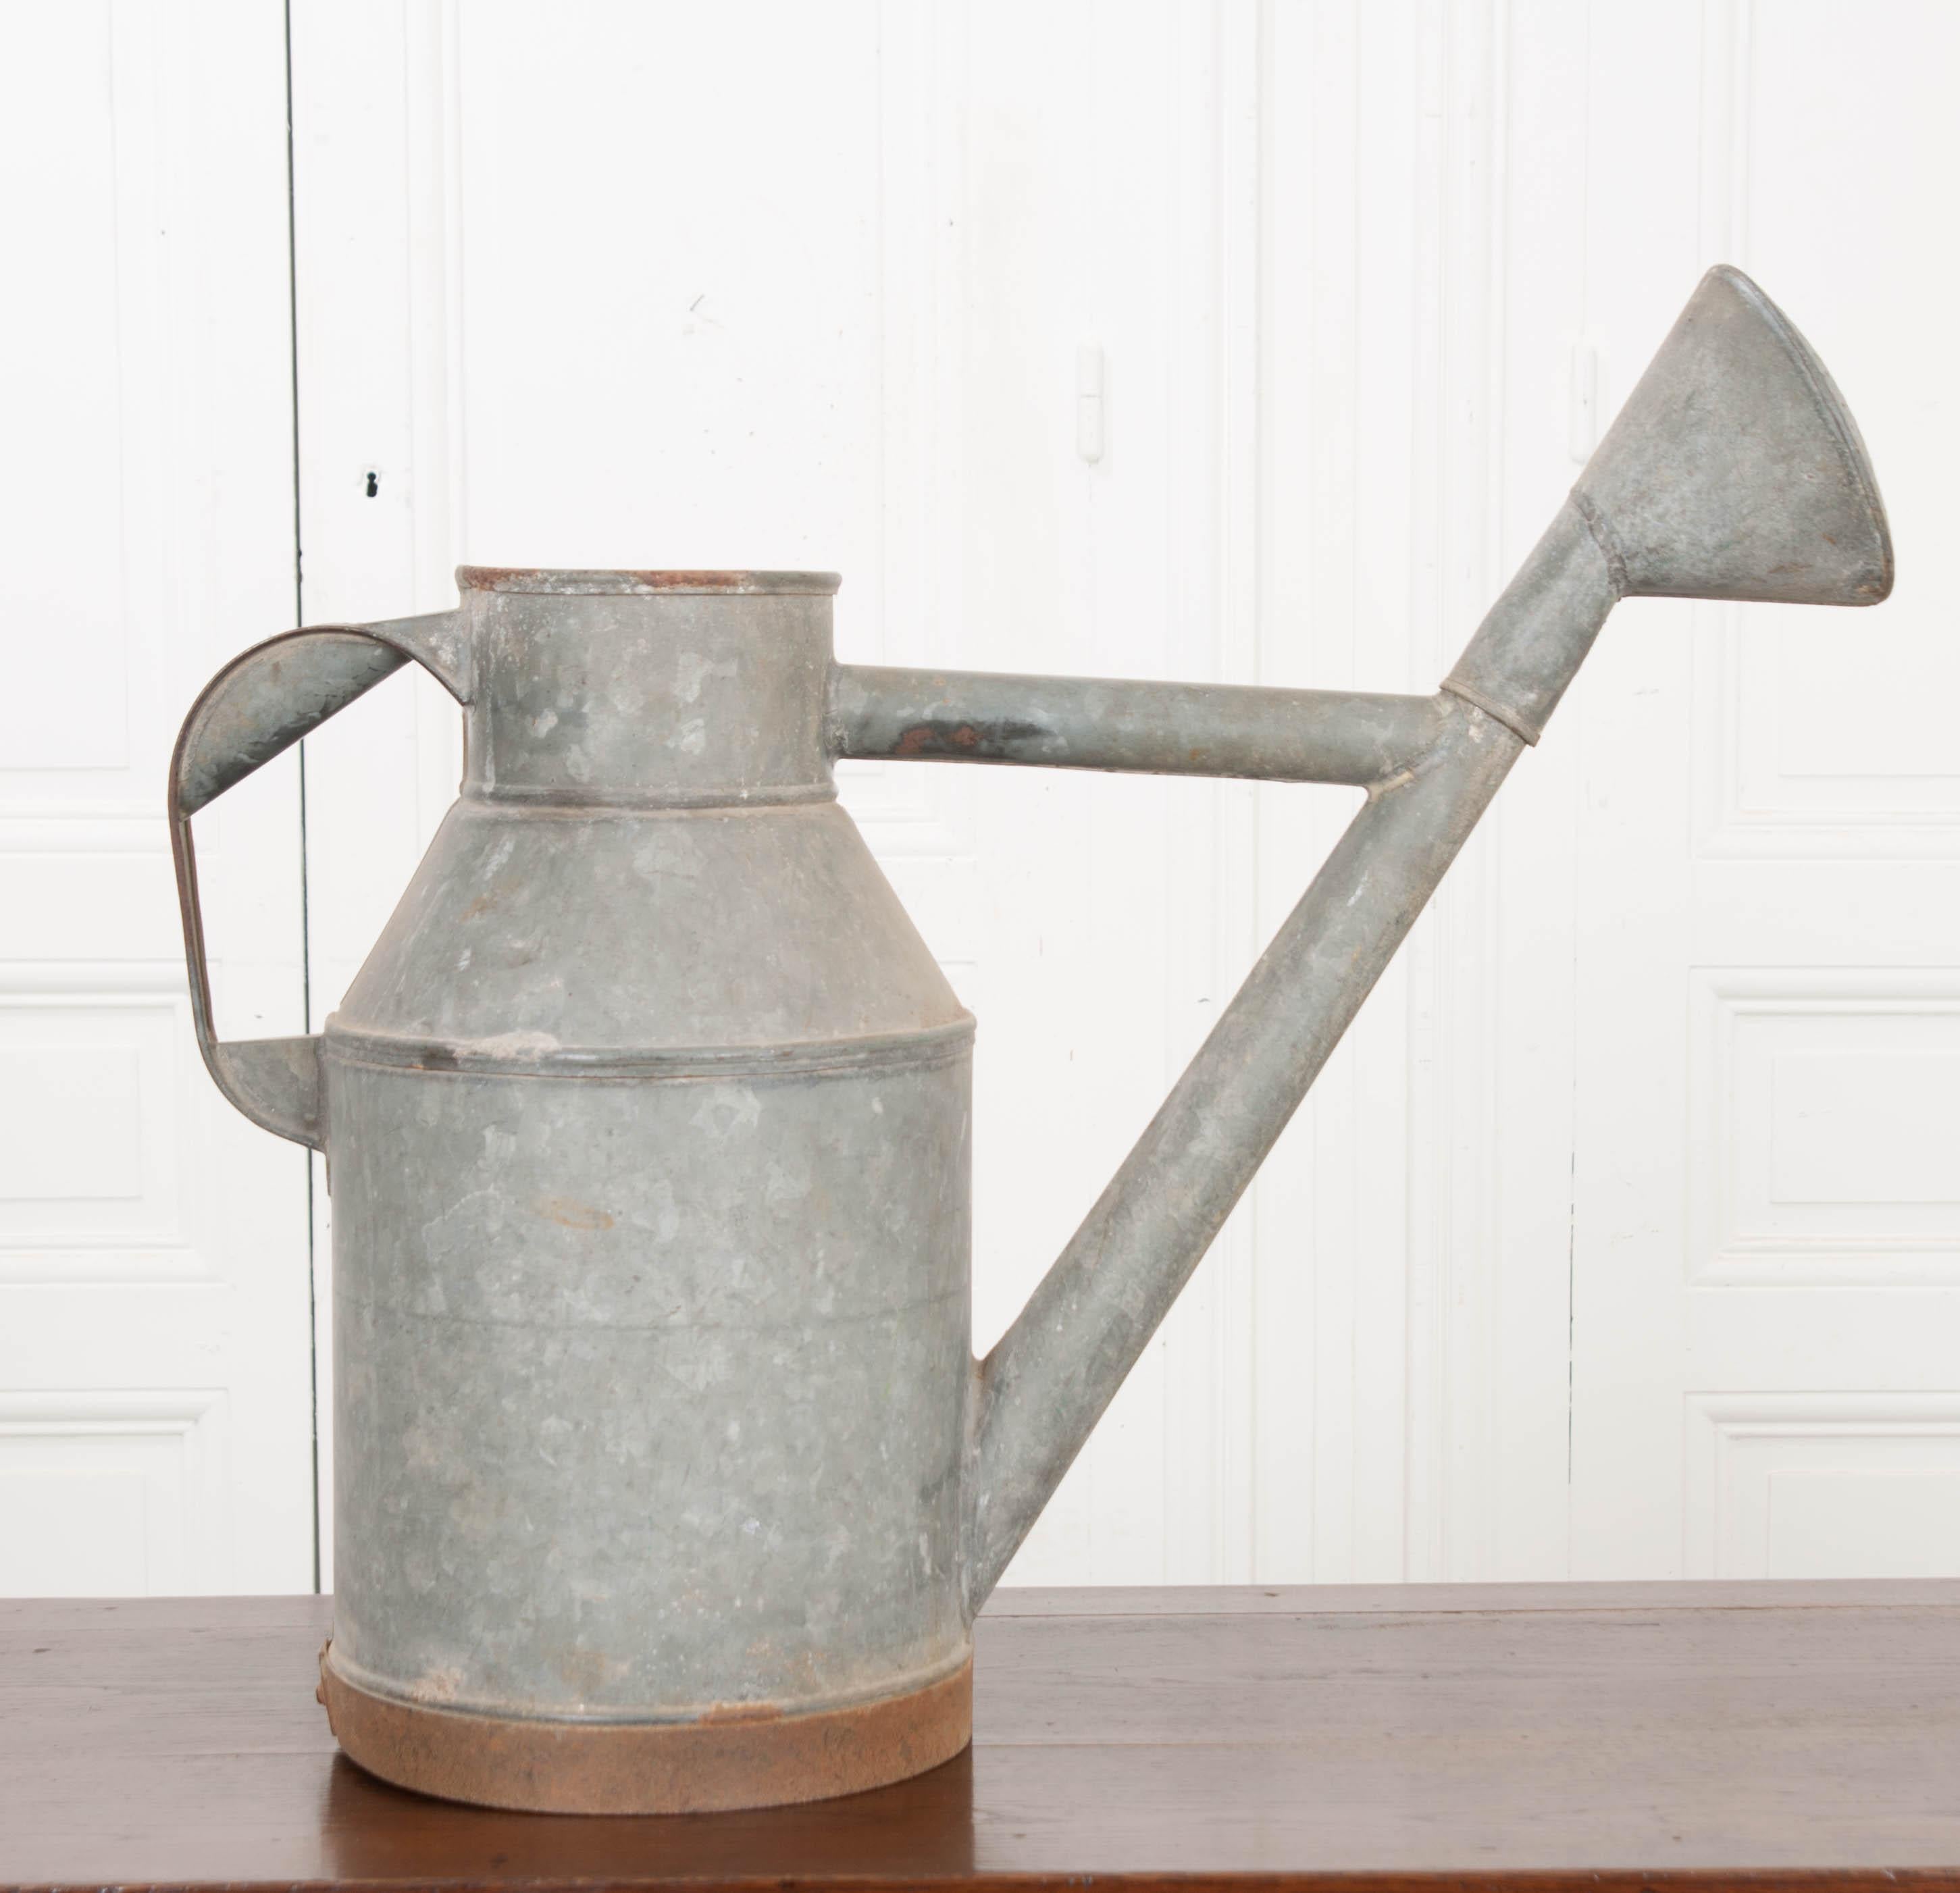 This charming zinc watering can, circa 1920s, is from England and will make tending to your garden very convenient!